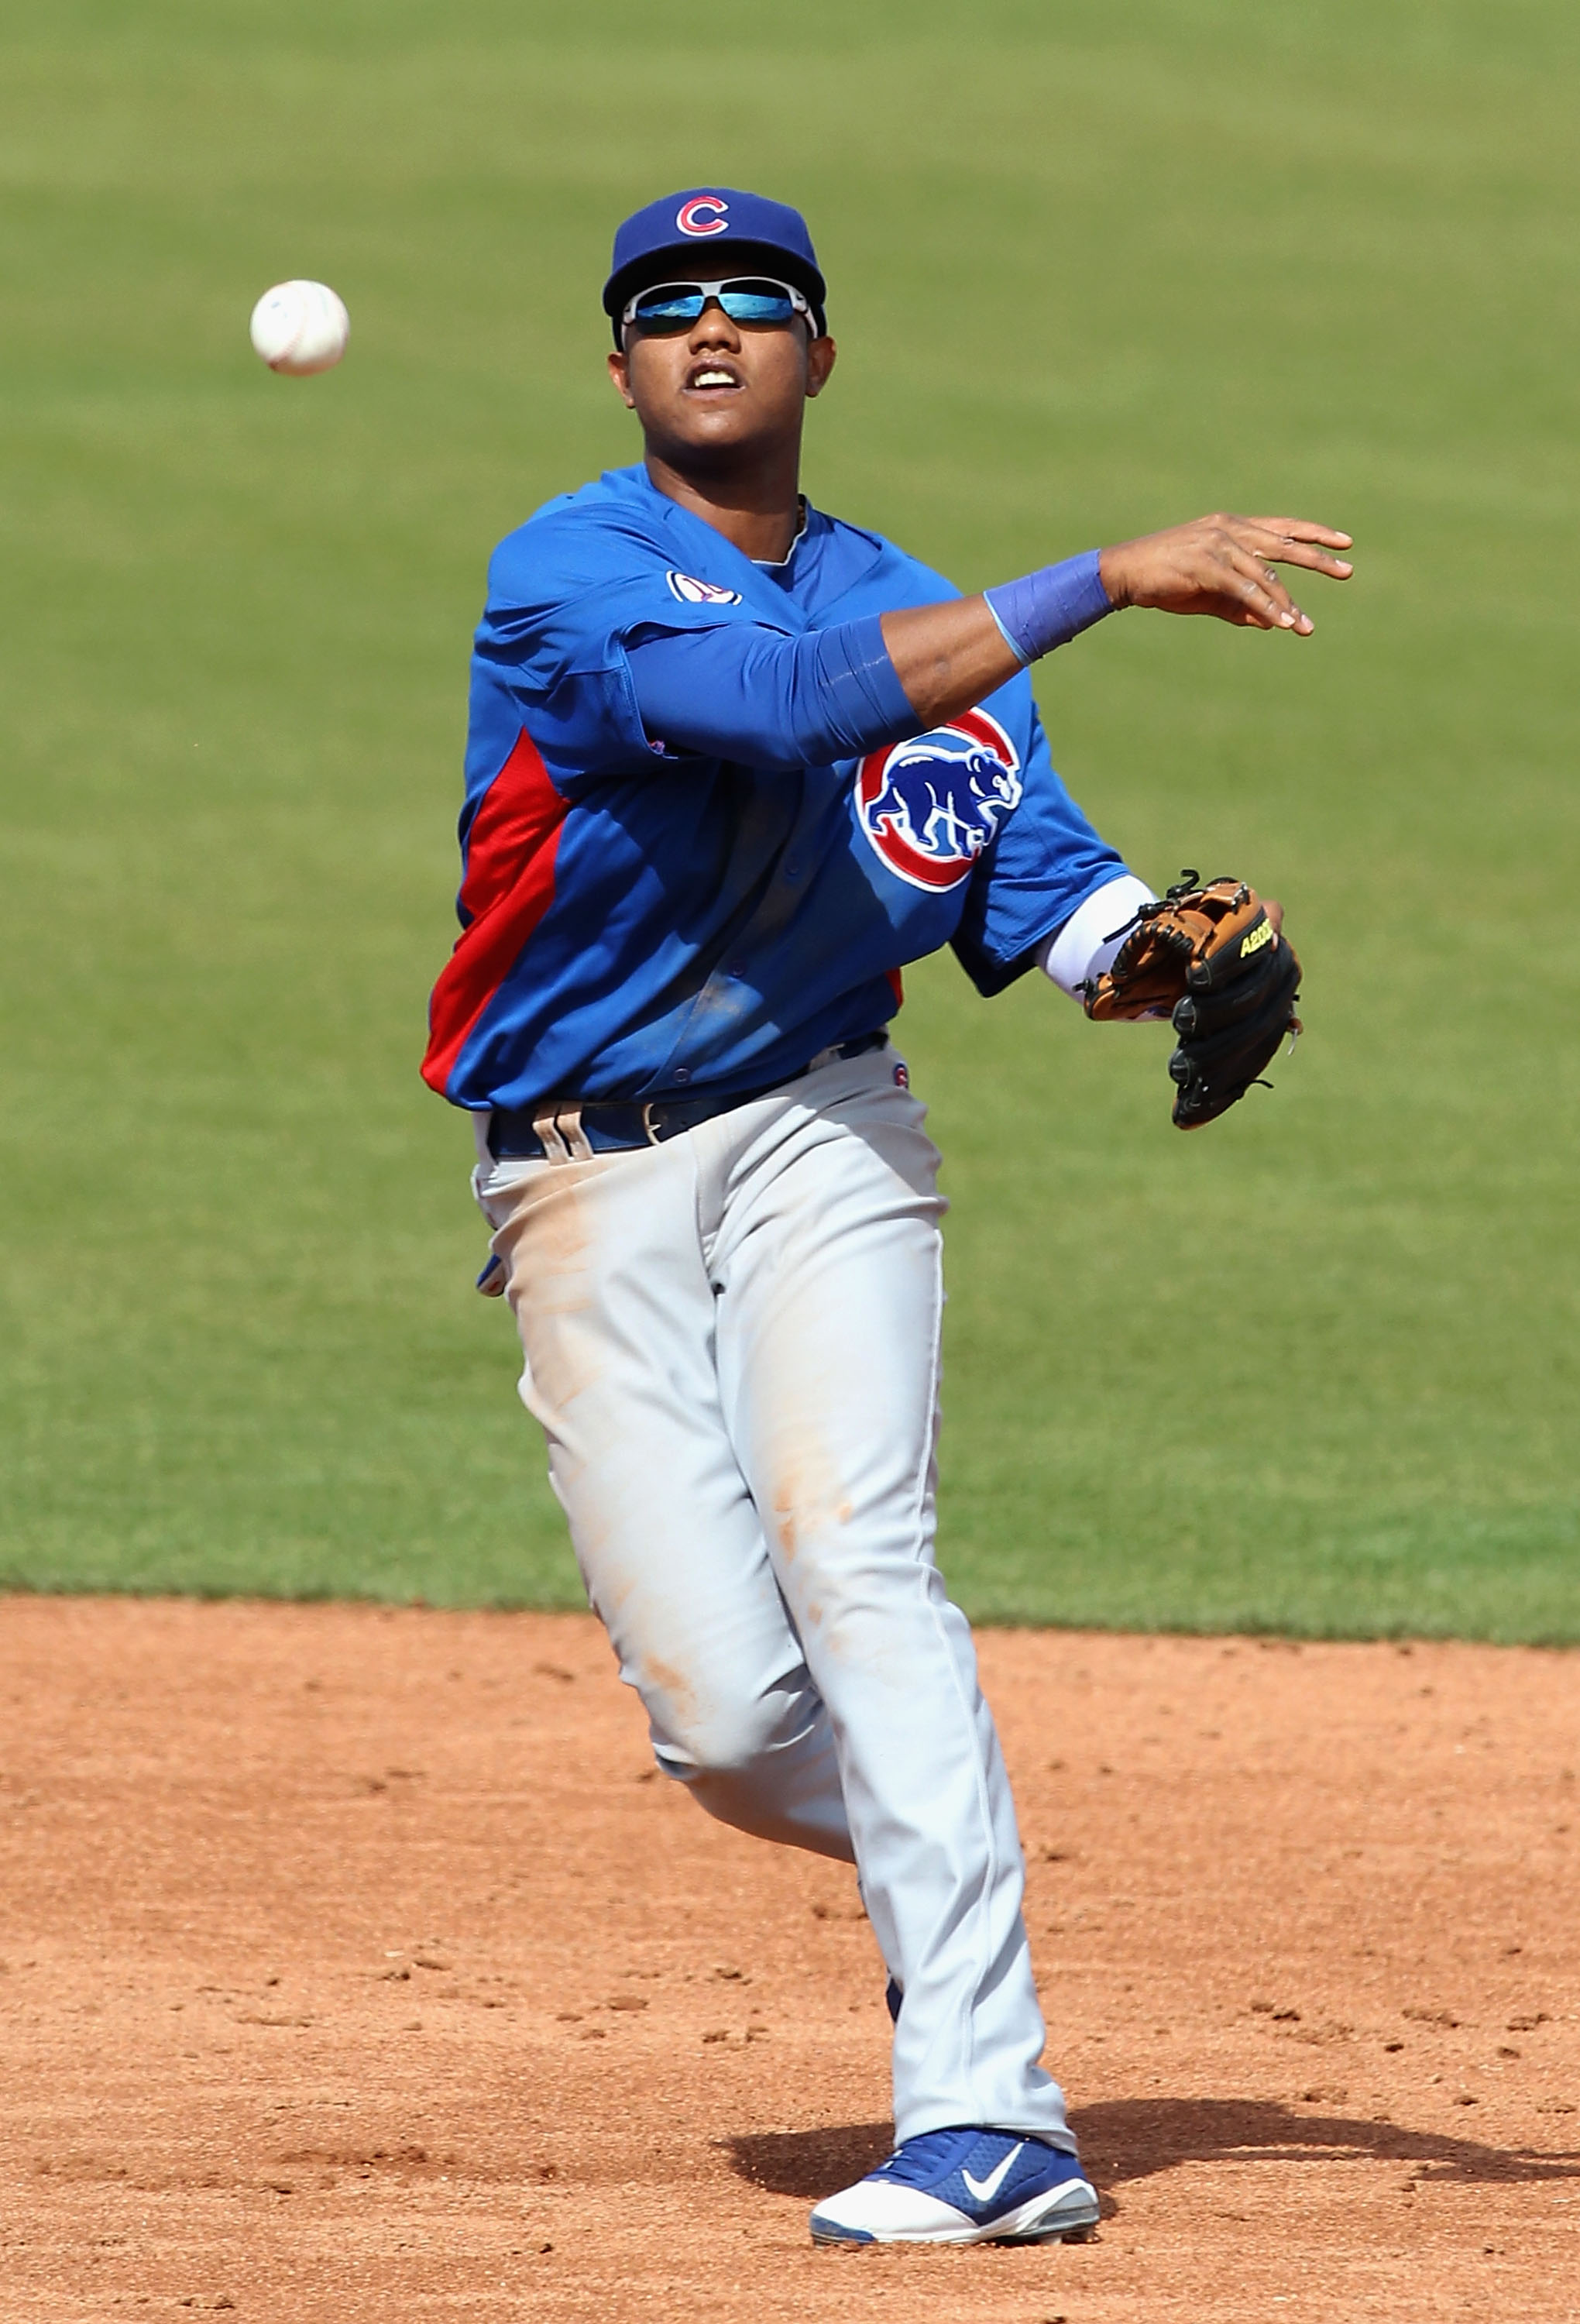 SCOTTSDALE, AZ - MARCH 01:  Infielder Starlin Castro #13 of the Chicago Cubs throws to first base attempting to turn a double play during the spring training game against the San Francisco Giants at Scottsdale Stadium on March 1, 2011 in Scottsdale, Arizo